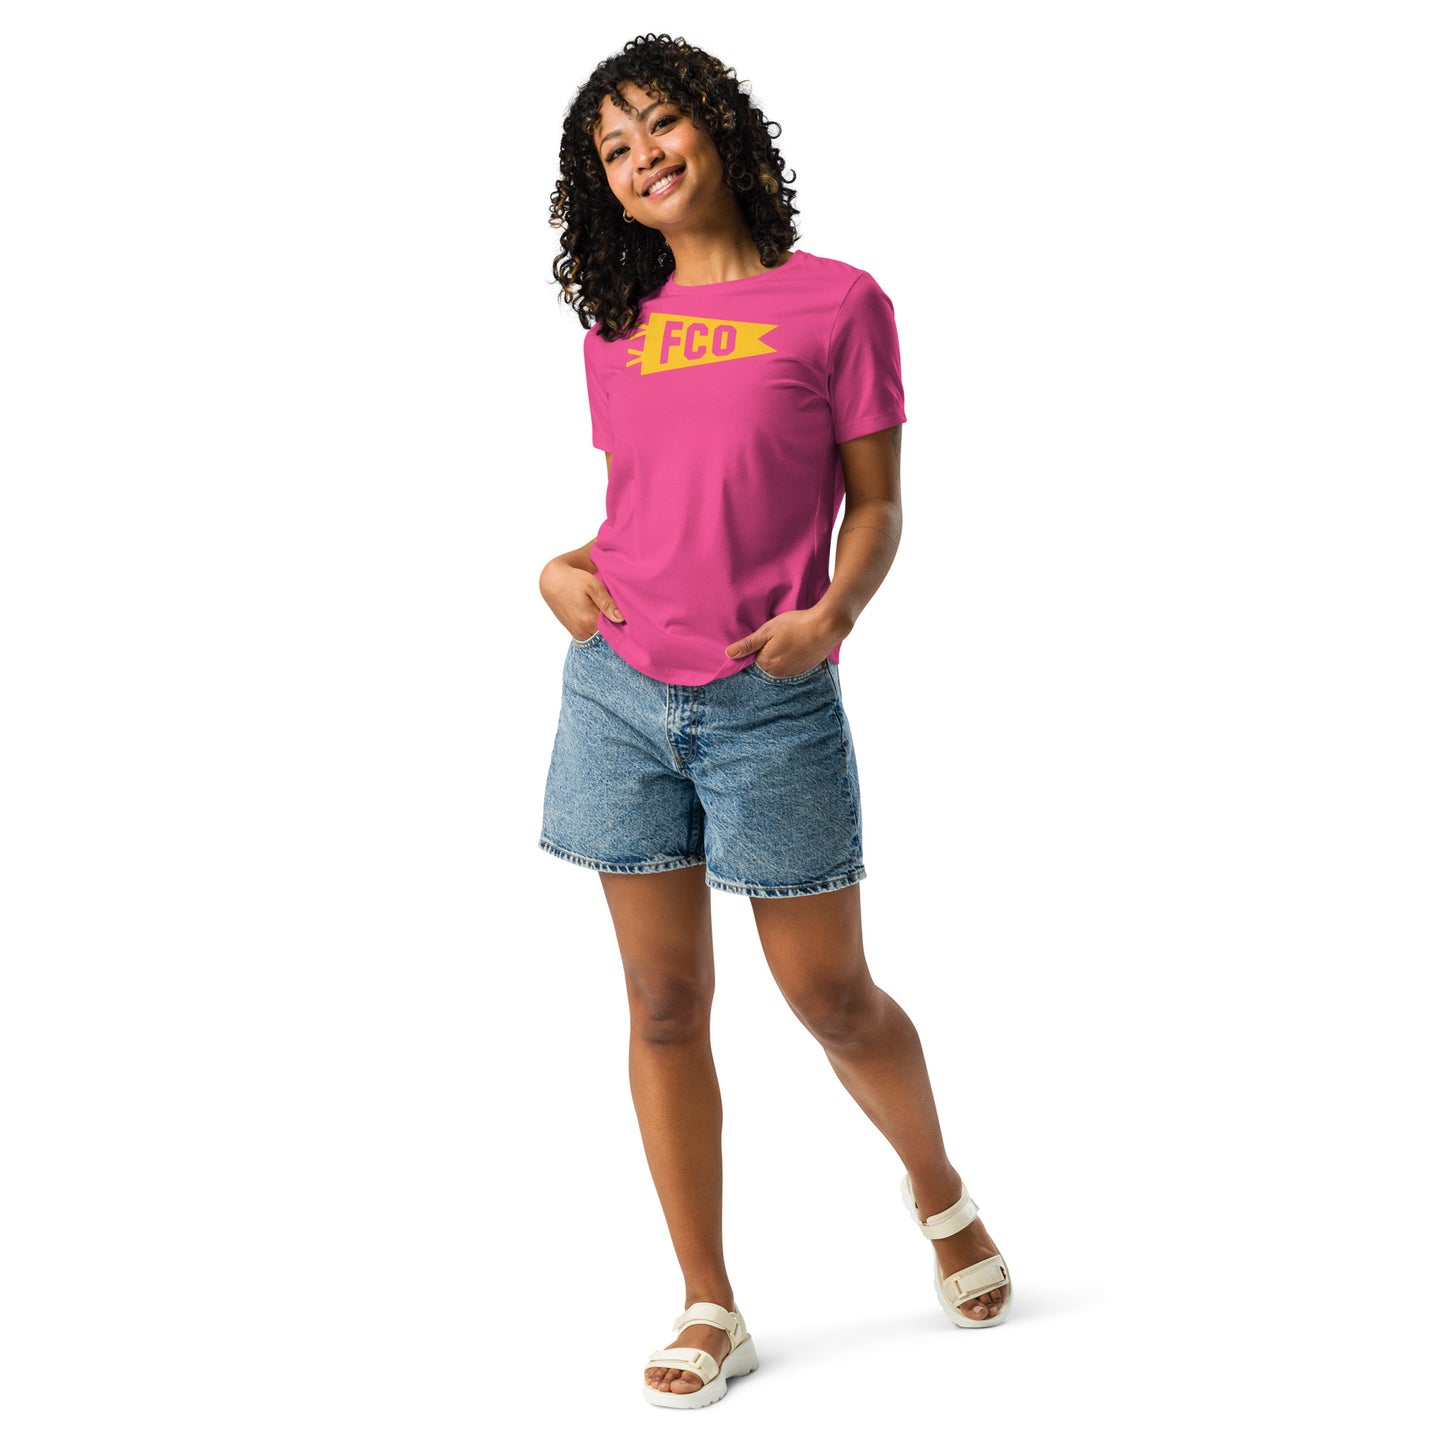 Airport Code Women's Tee - Yellow Graphic • FCO Rome • YHM Designs - Image 08